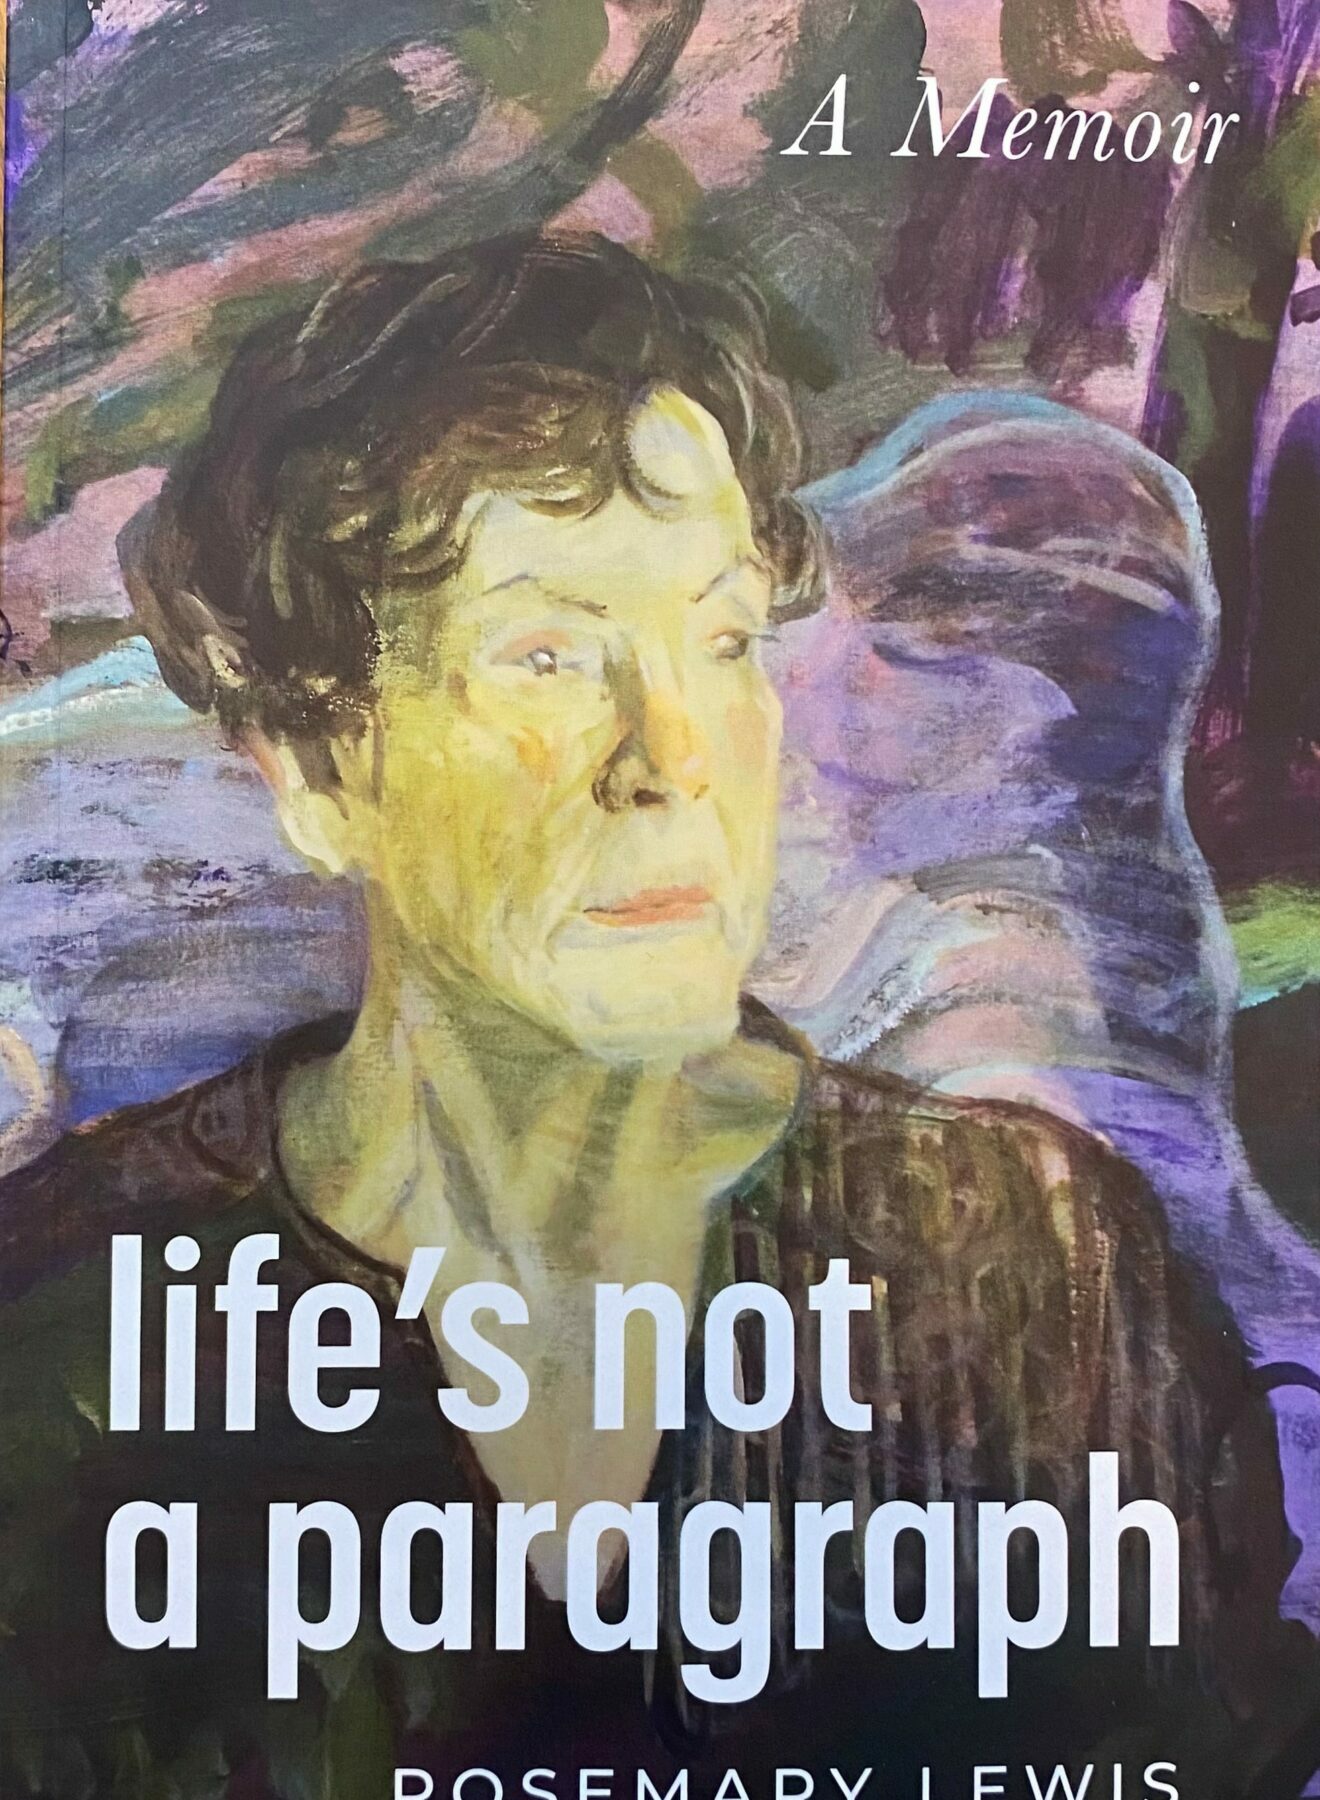 A book cover featuring artwork of a woman with short hair looking off to one side. The title is overlaid in blue